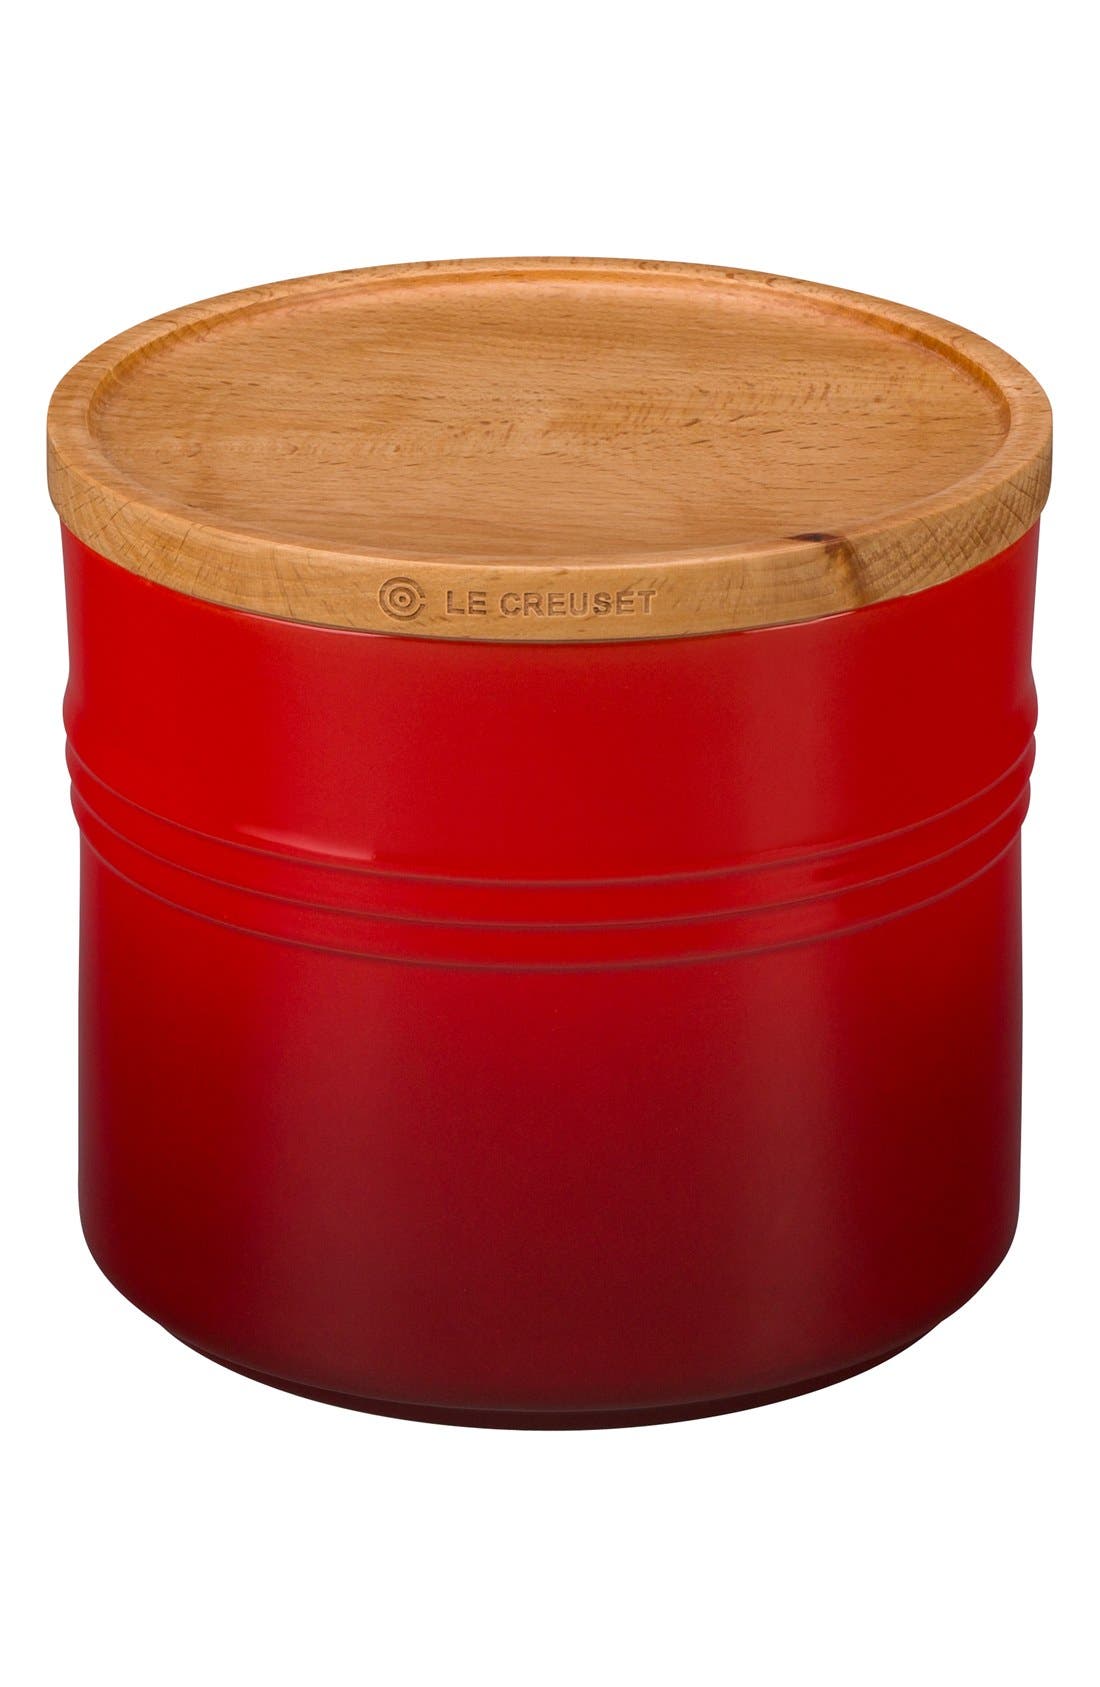 Le Creuset PG1518-1417 Stoneware Canister with Wood Lid 1 1/2 quart Caribbean 